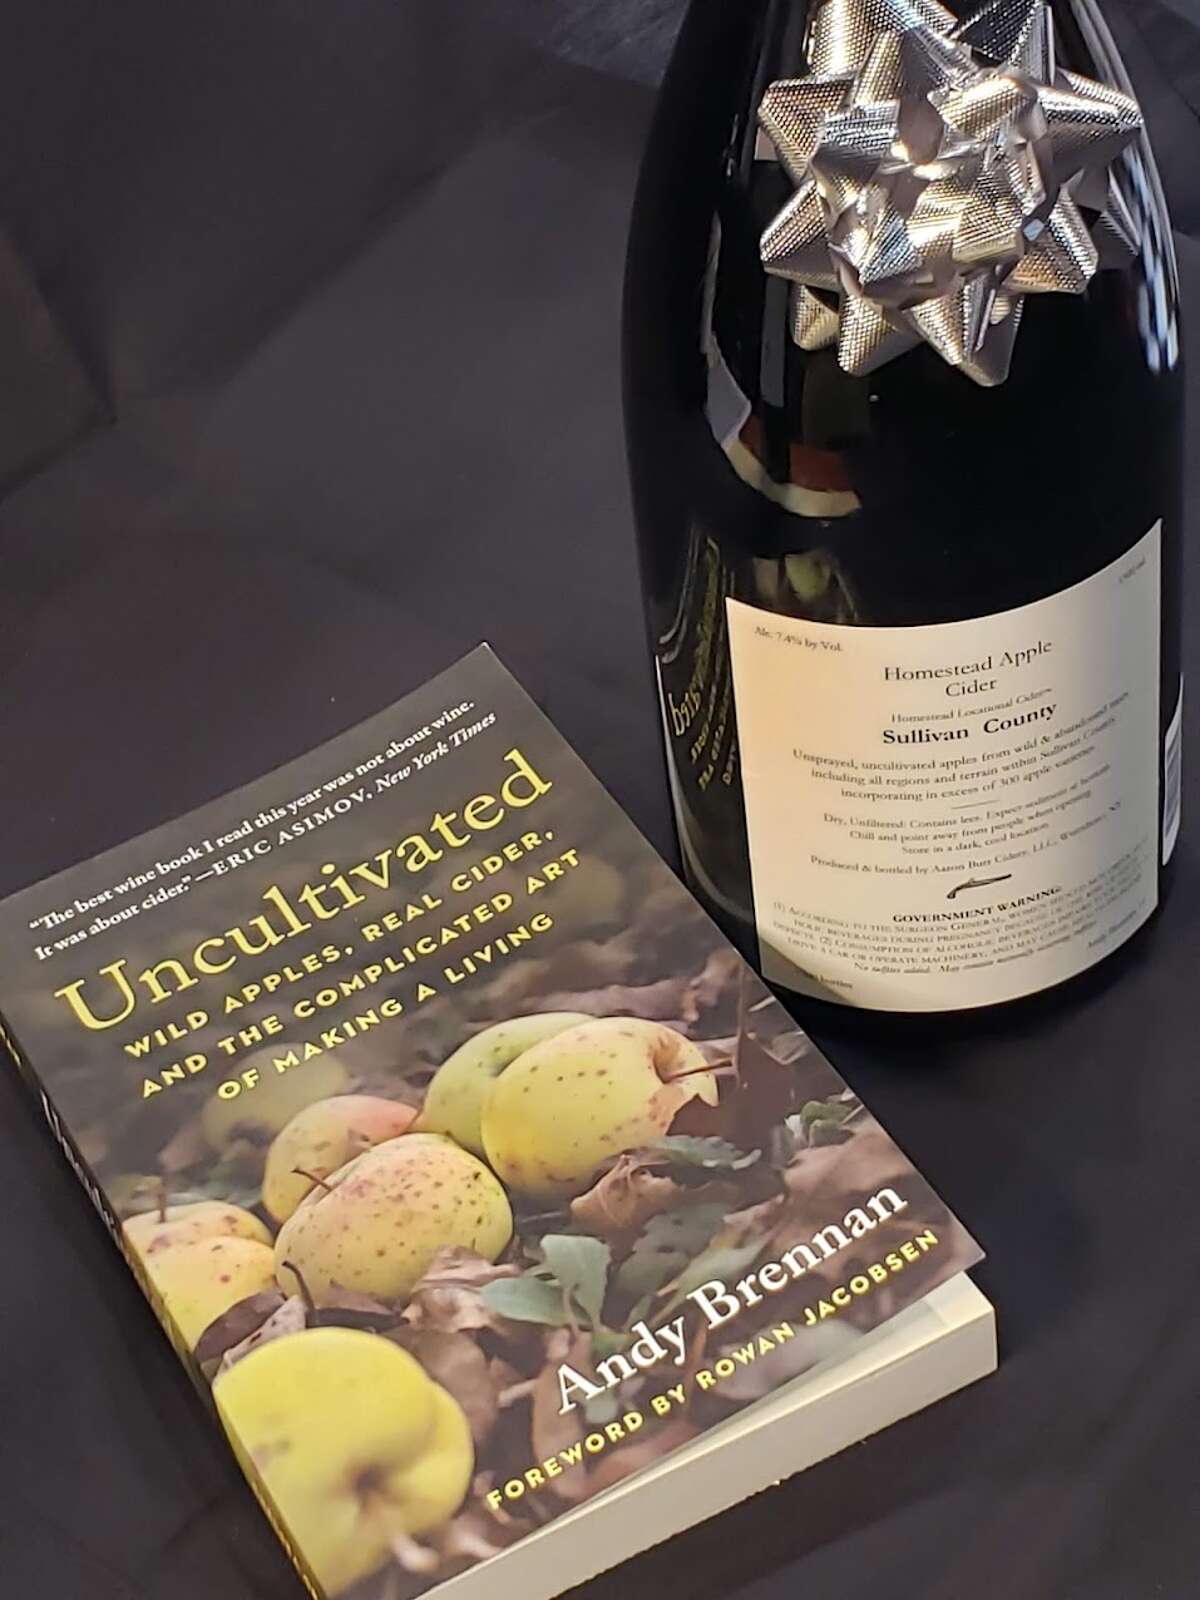 Flori likes to pair a magnum of the Aaron Burr Homestead Cider with the cider maker's book, "Uncultivated."